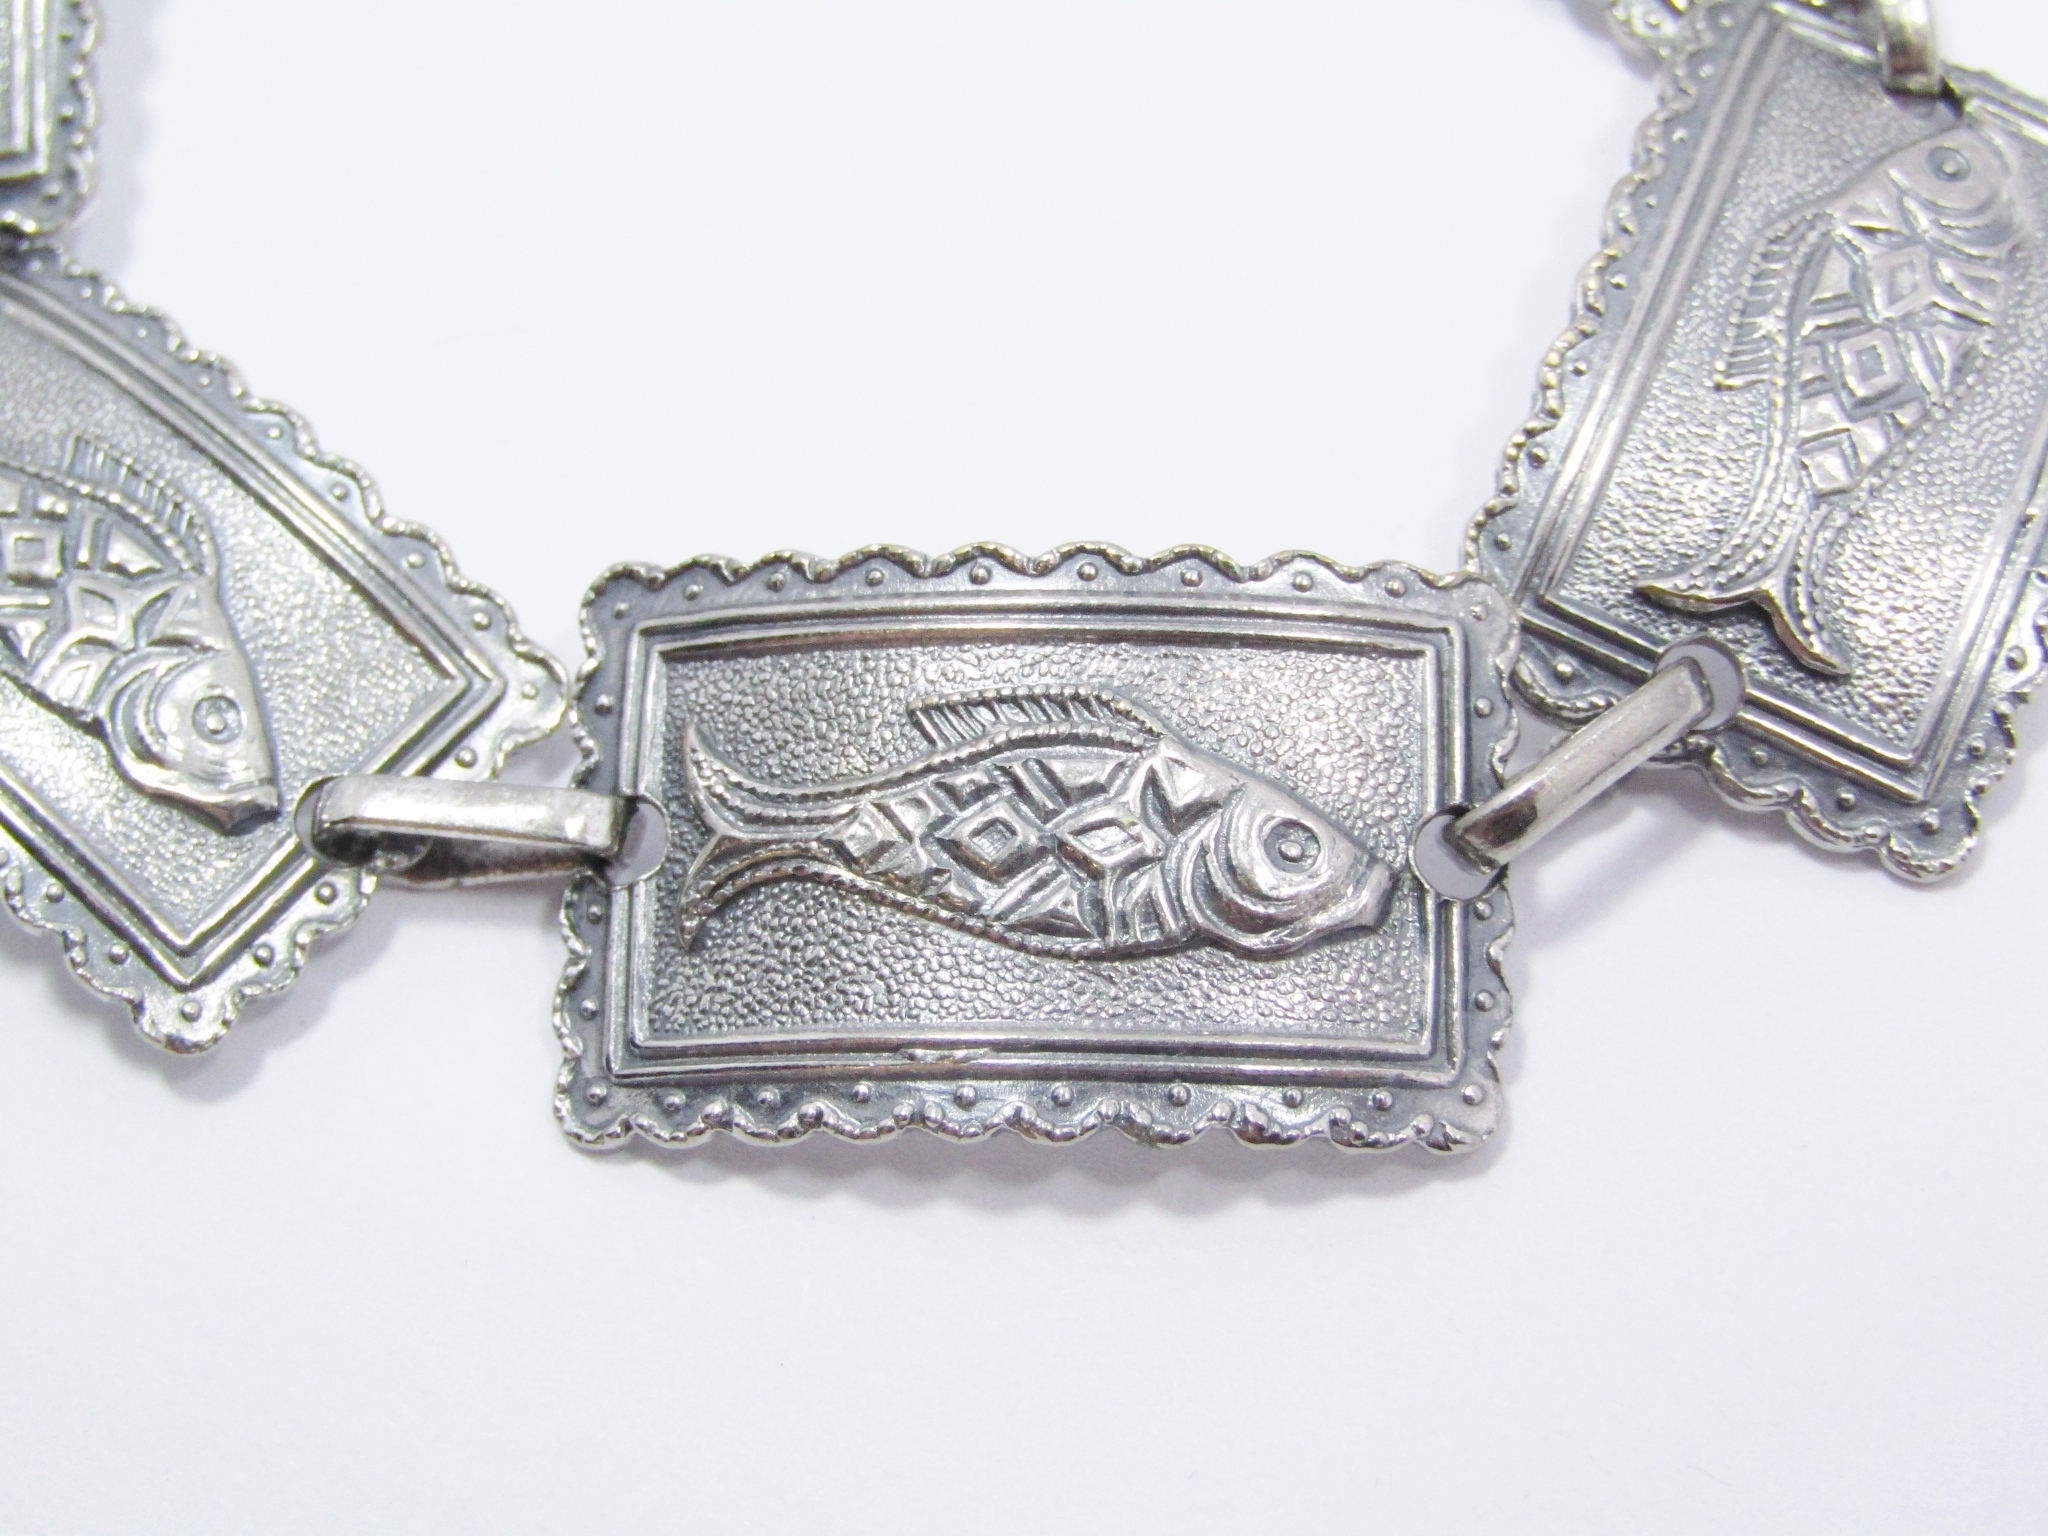 A Gorgeous Engraved Textured Design Bracelet in Silver.